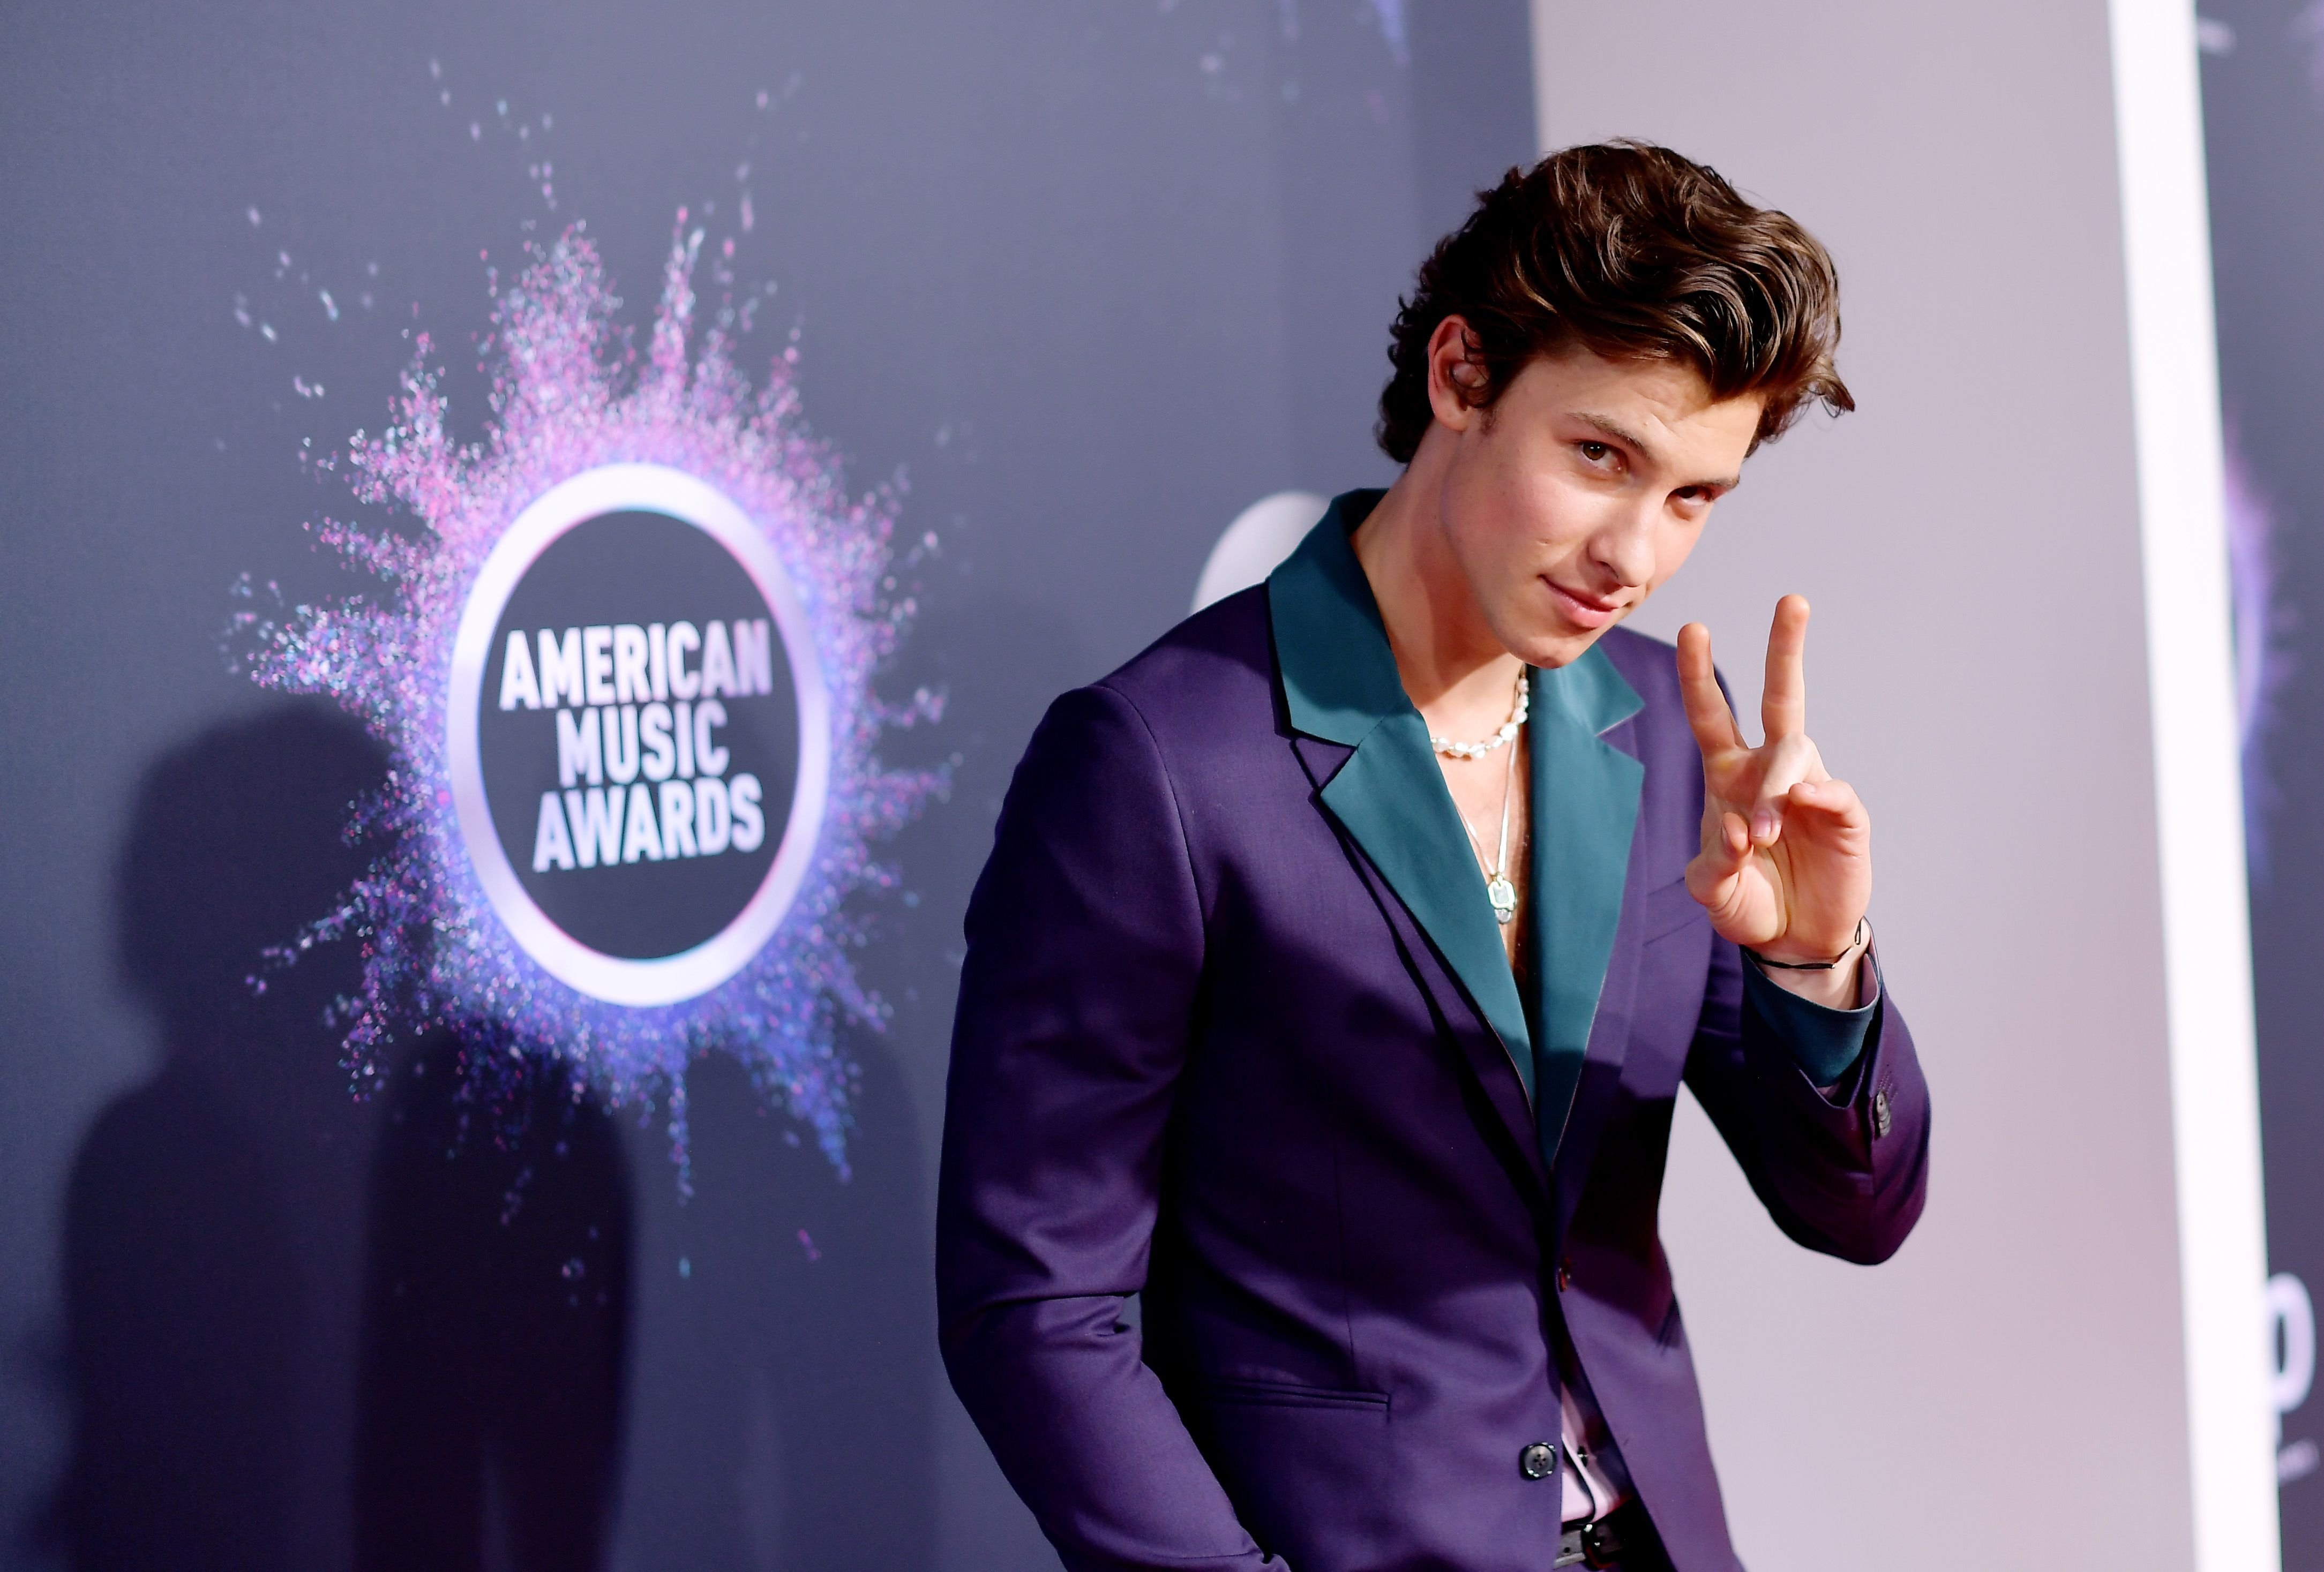 "Life is Strange" Executive Producer Shawn Mendes at the 2019 American Music Awards at Microsoft Theater in Los Angeles, California | Photo: Taylor Hill/FilmMagic via Getty Images